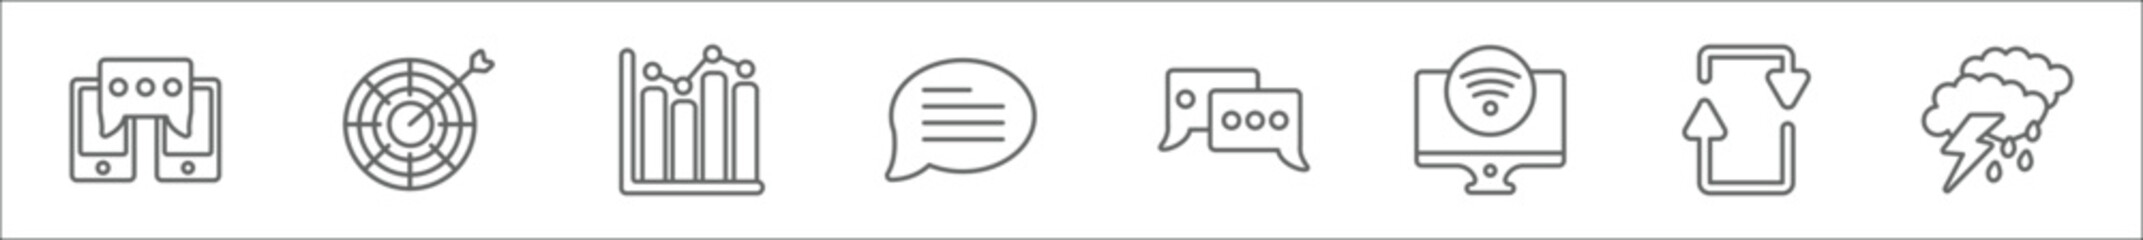 outline set of ultimate glyphicons line icons. linear vector icons such as phone connection, target with circle, three bars graph, message balloon, message bubble, tv wireless connection, refresh